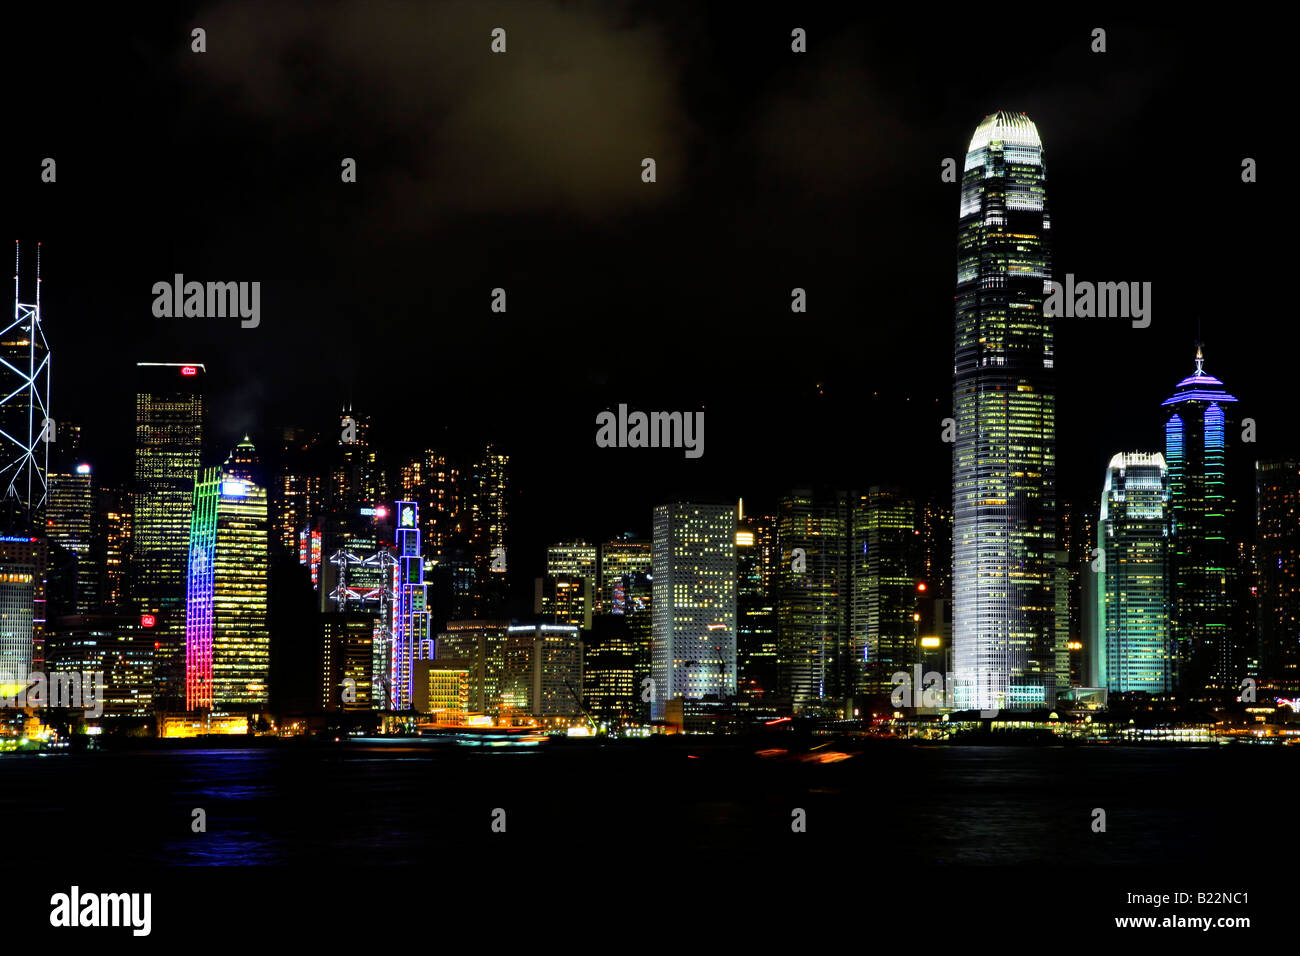 Hong Kong Island skyline at night with illuminated buildings and prominent IFC tower, viewed from the Kowloon mainland Stock Photo